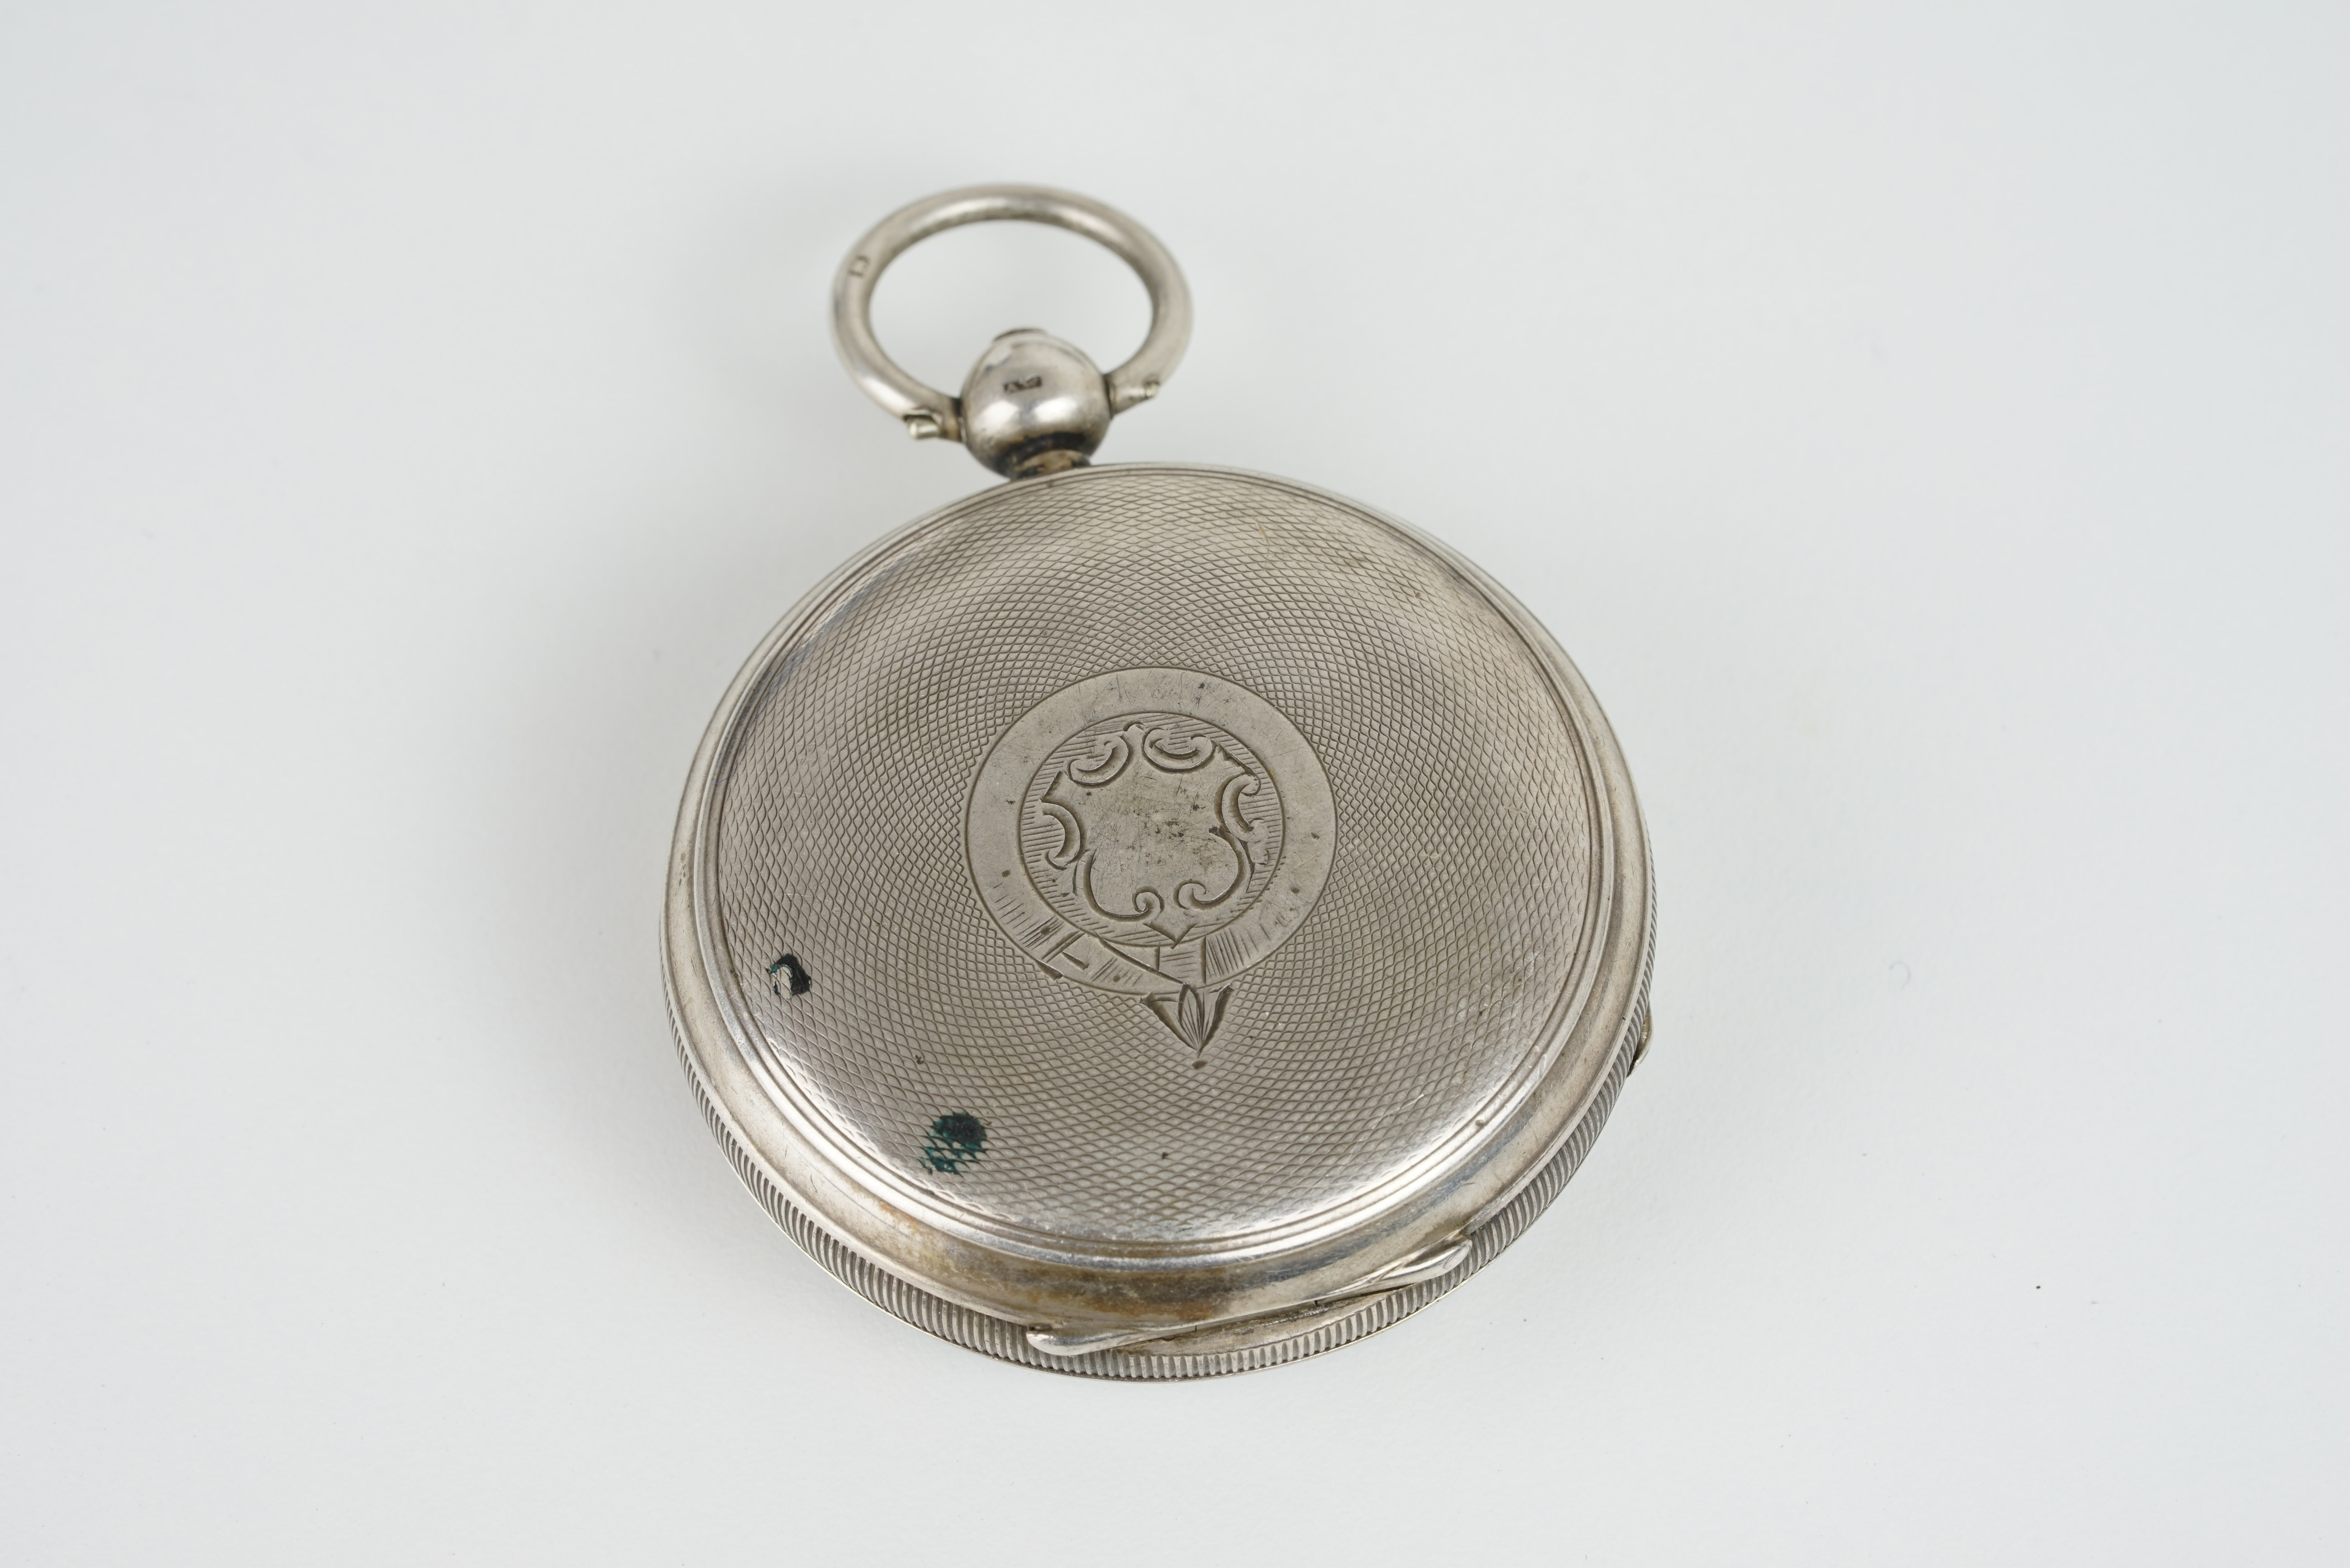 VINTAGE JOHN MYERS & CO SILVER POCKET WATCH, circular white dial with hands, 53mm case with a - Image 2 of 2